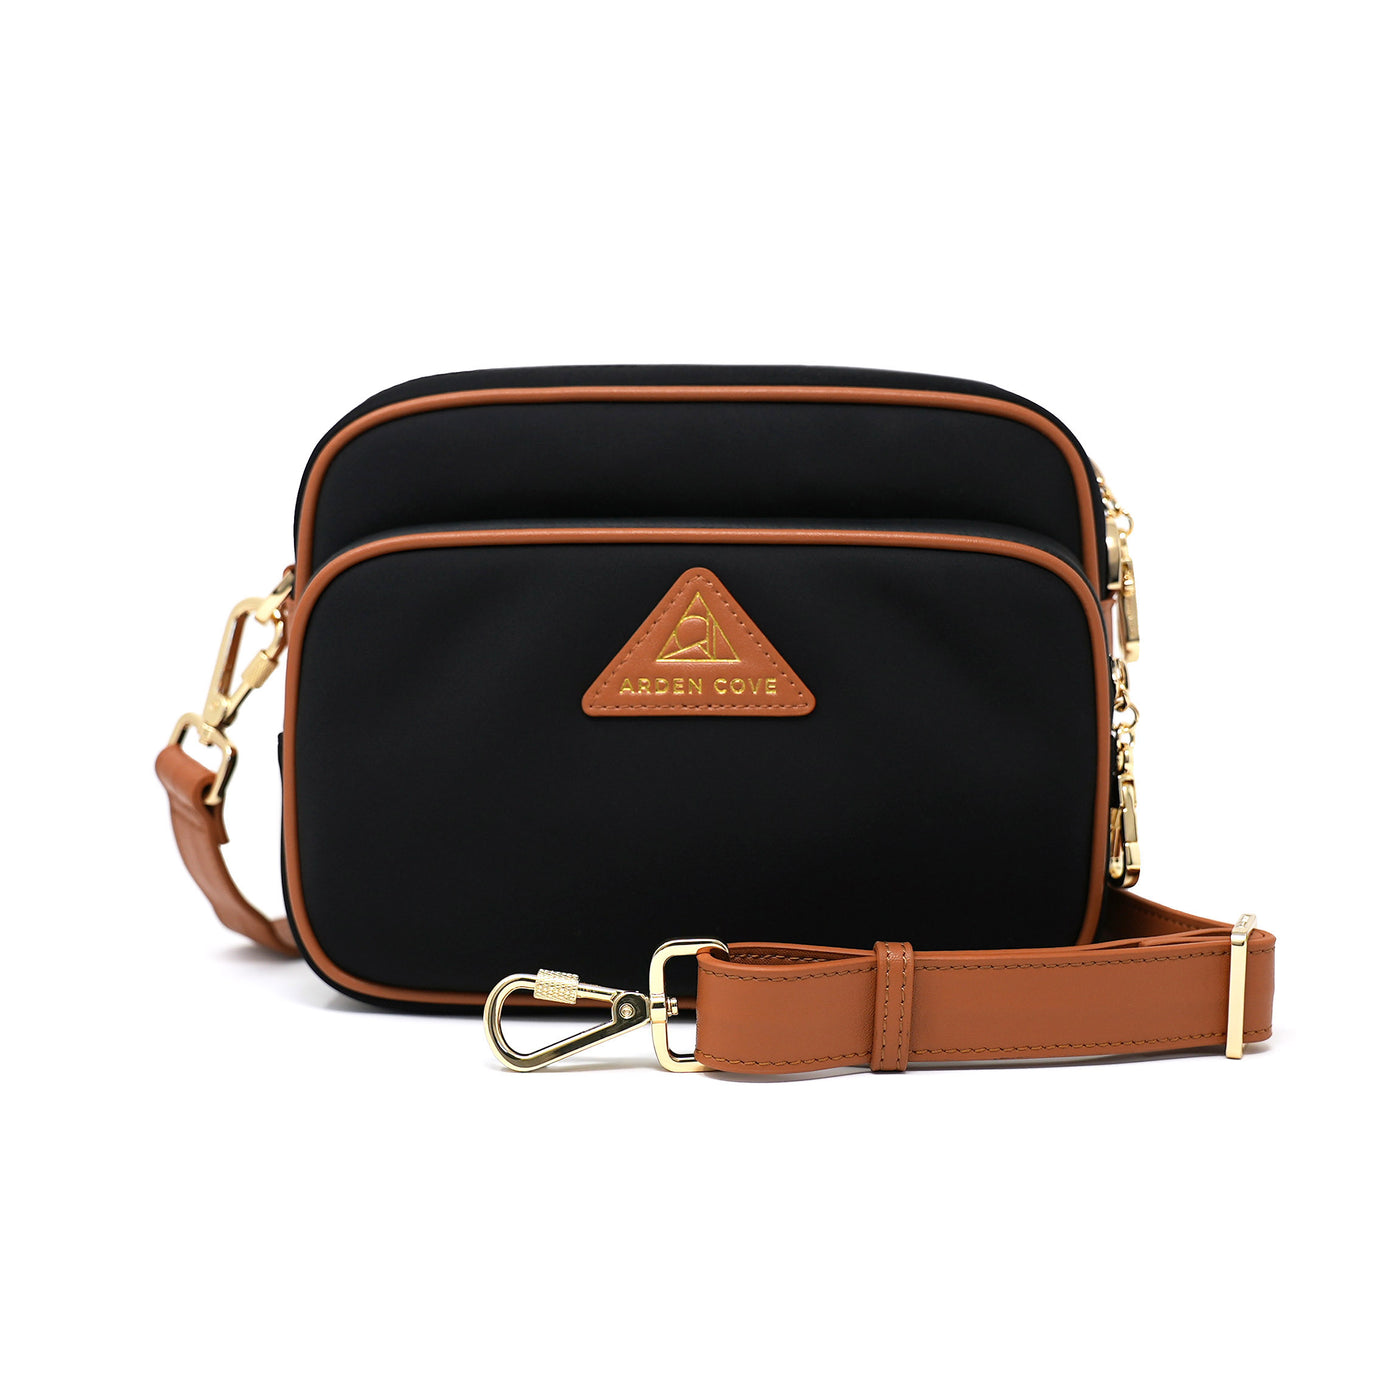 Anti-theft Water-resistant Travel Crossbody - Crissy Full Crossbody in Black/Brown Gold with slash-resistant wide faux leather locking clasps straps - front view - Arden Cove